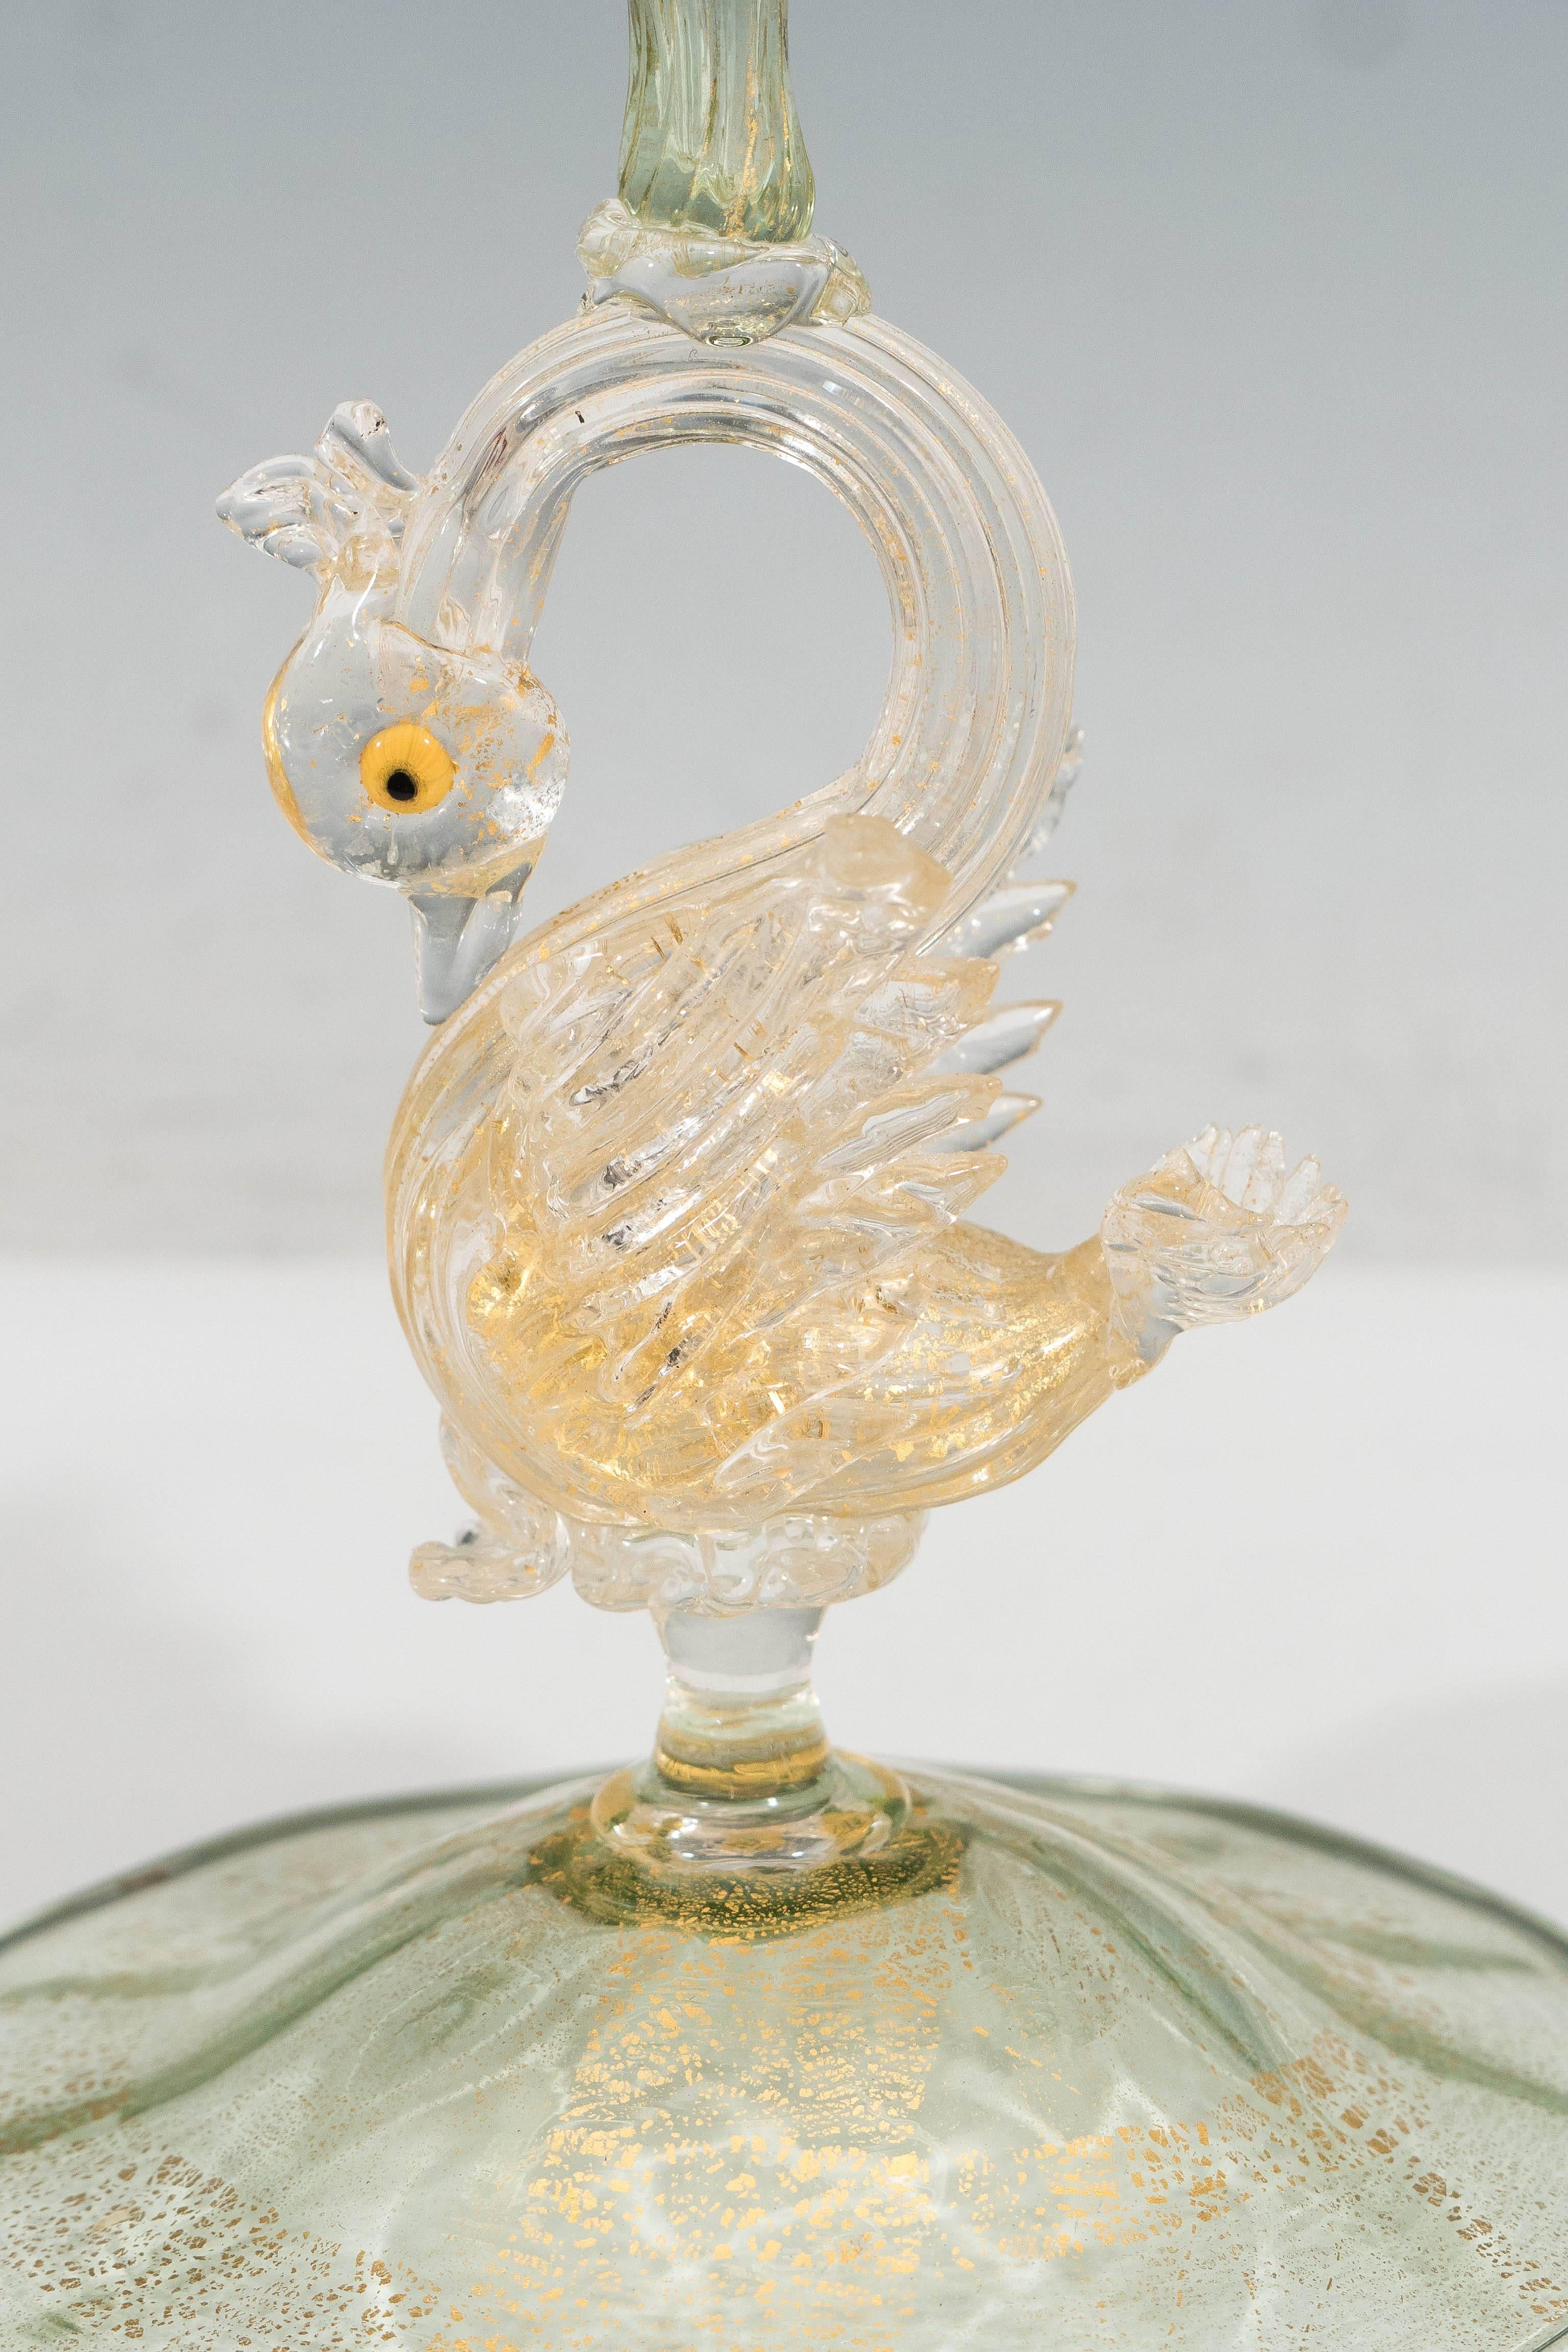 A Venetian handblown glass candlestick, produced circa 1920s by Salviati, light green in tone, with bulb capital and bobeche, over baluster form stem and swan motif on round foot, infused with flecks of gold leaf. The glass remains in very good